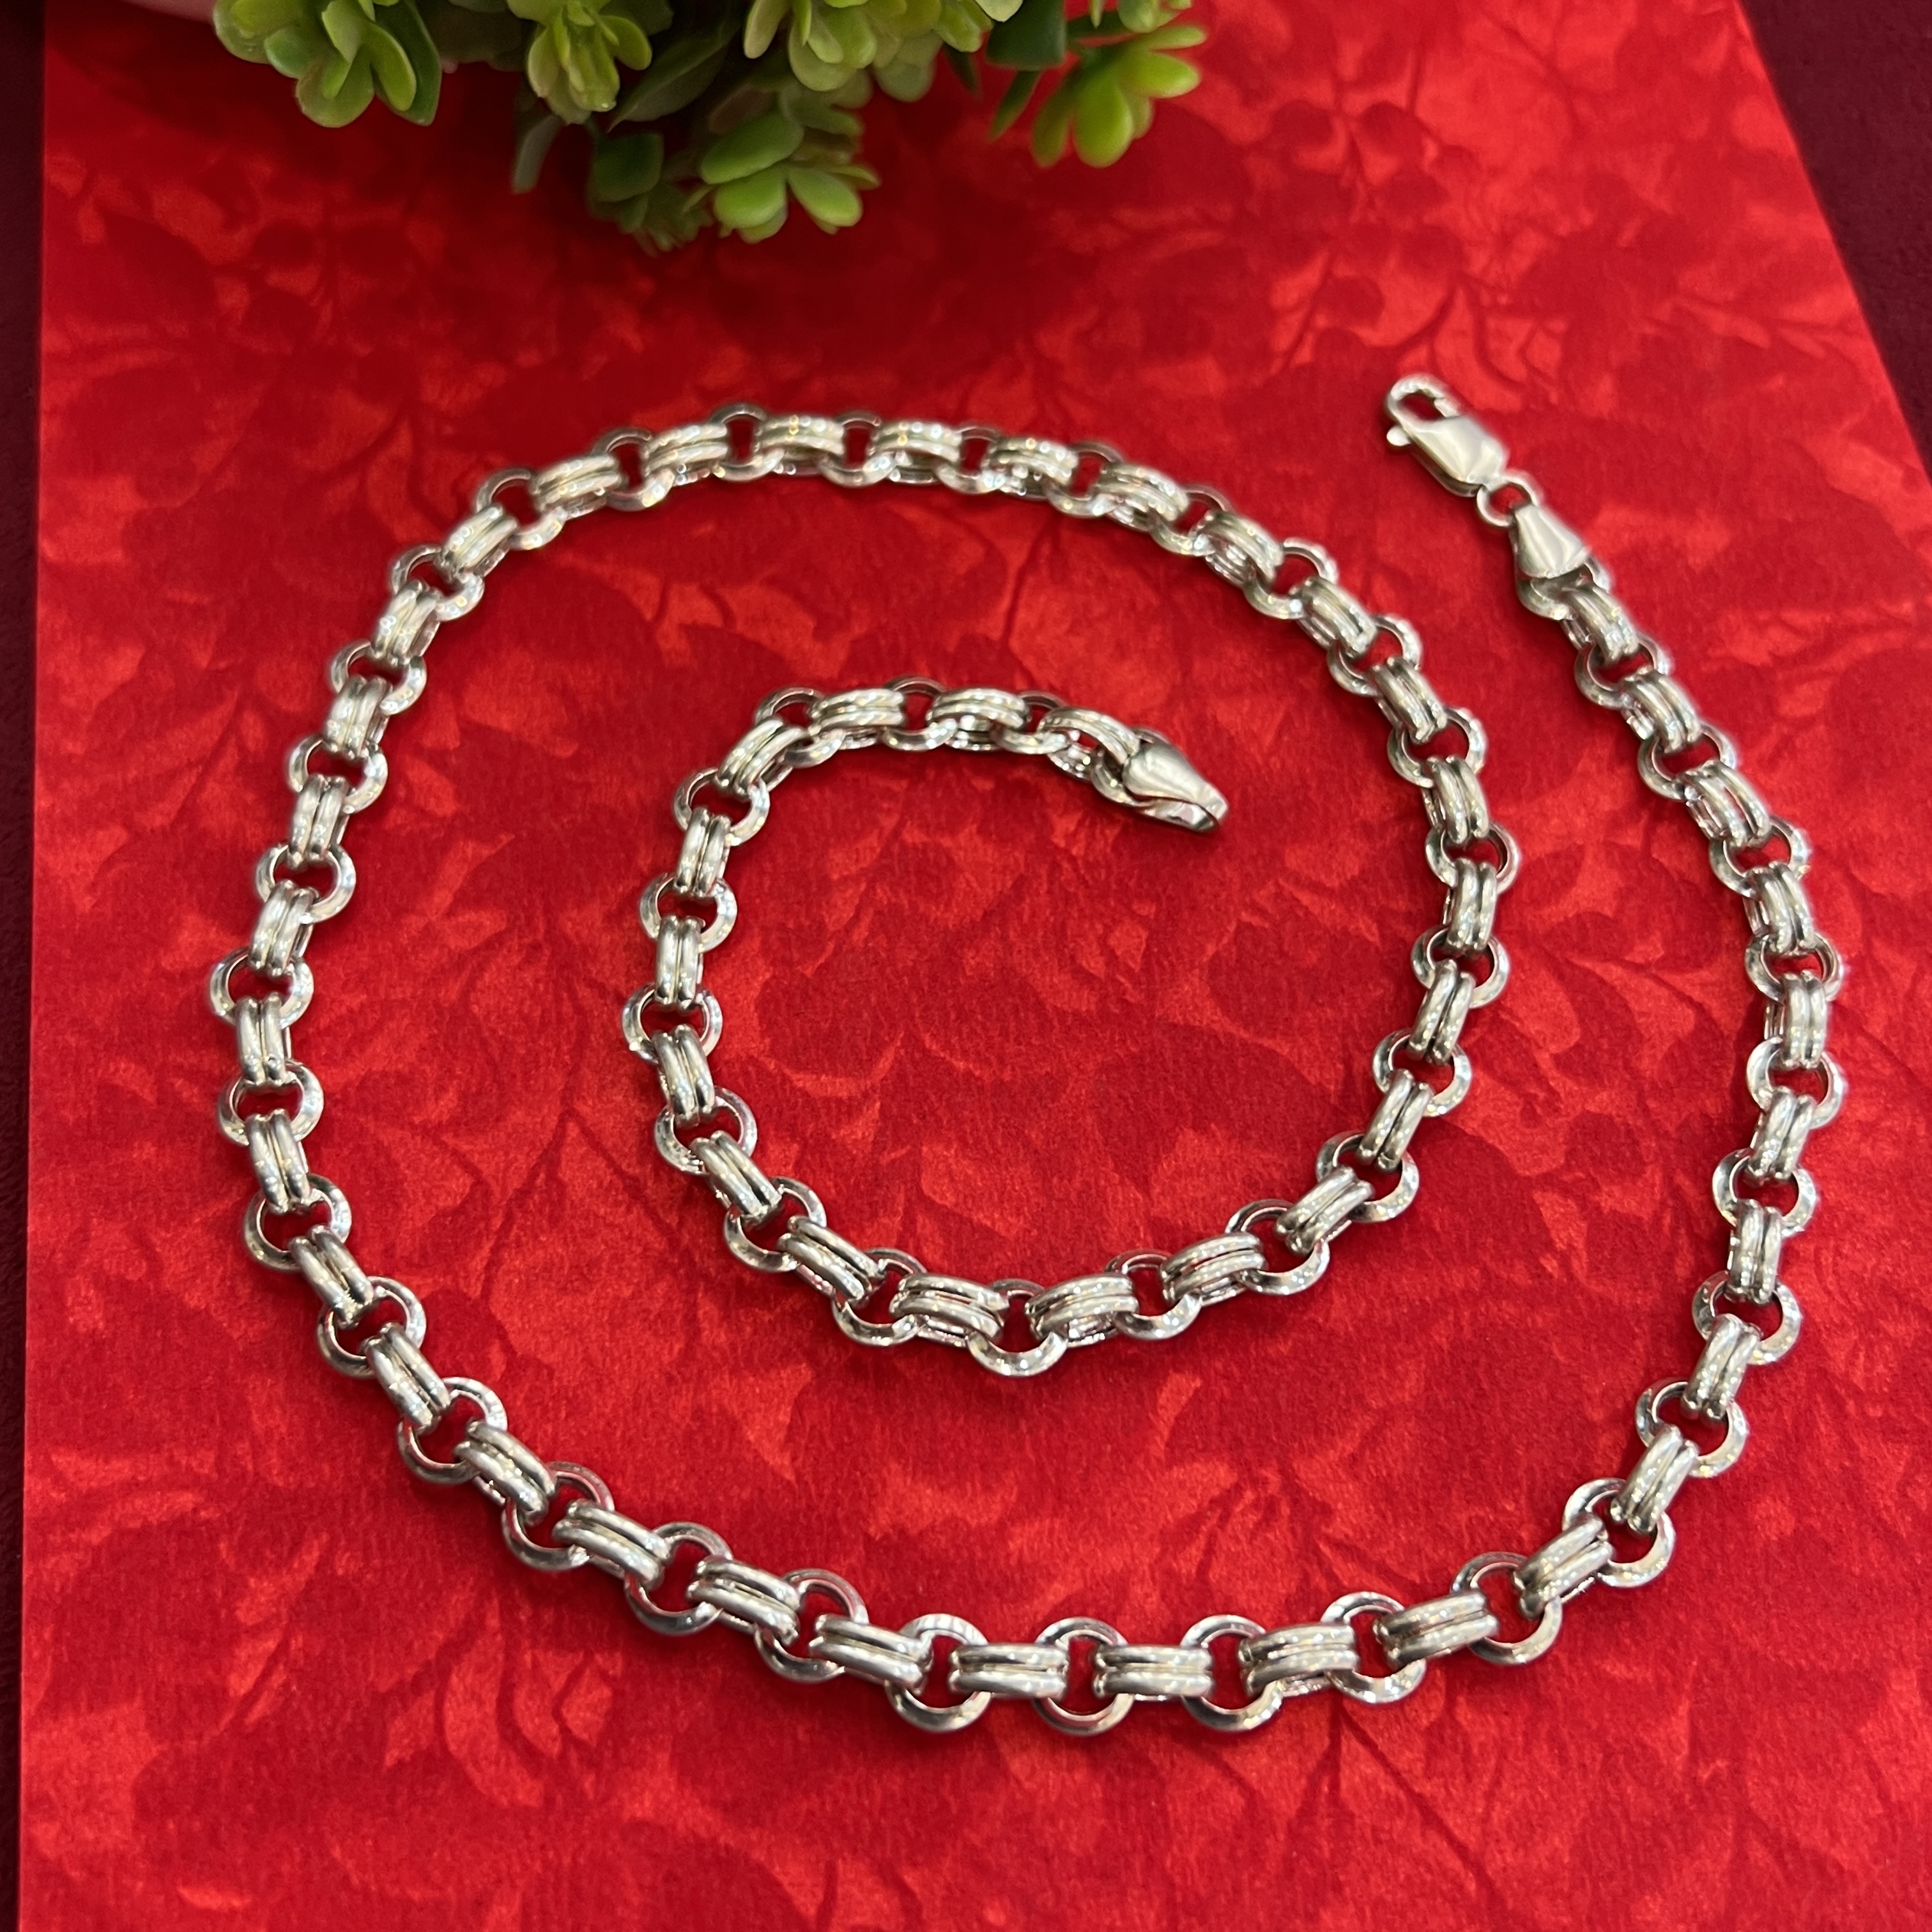 Top 7 Mens Silver Chain Brands You Need to Know About